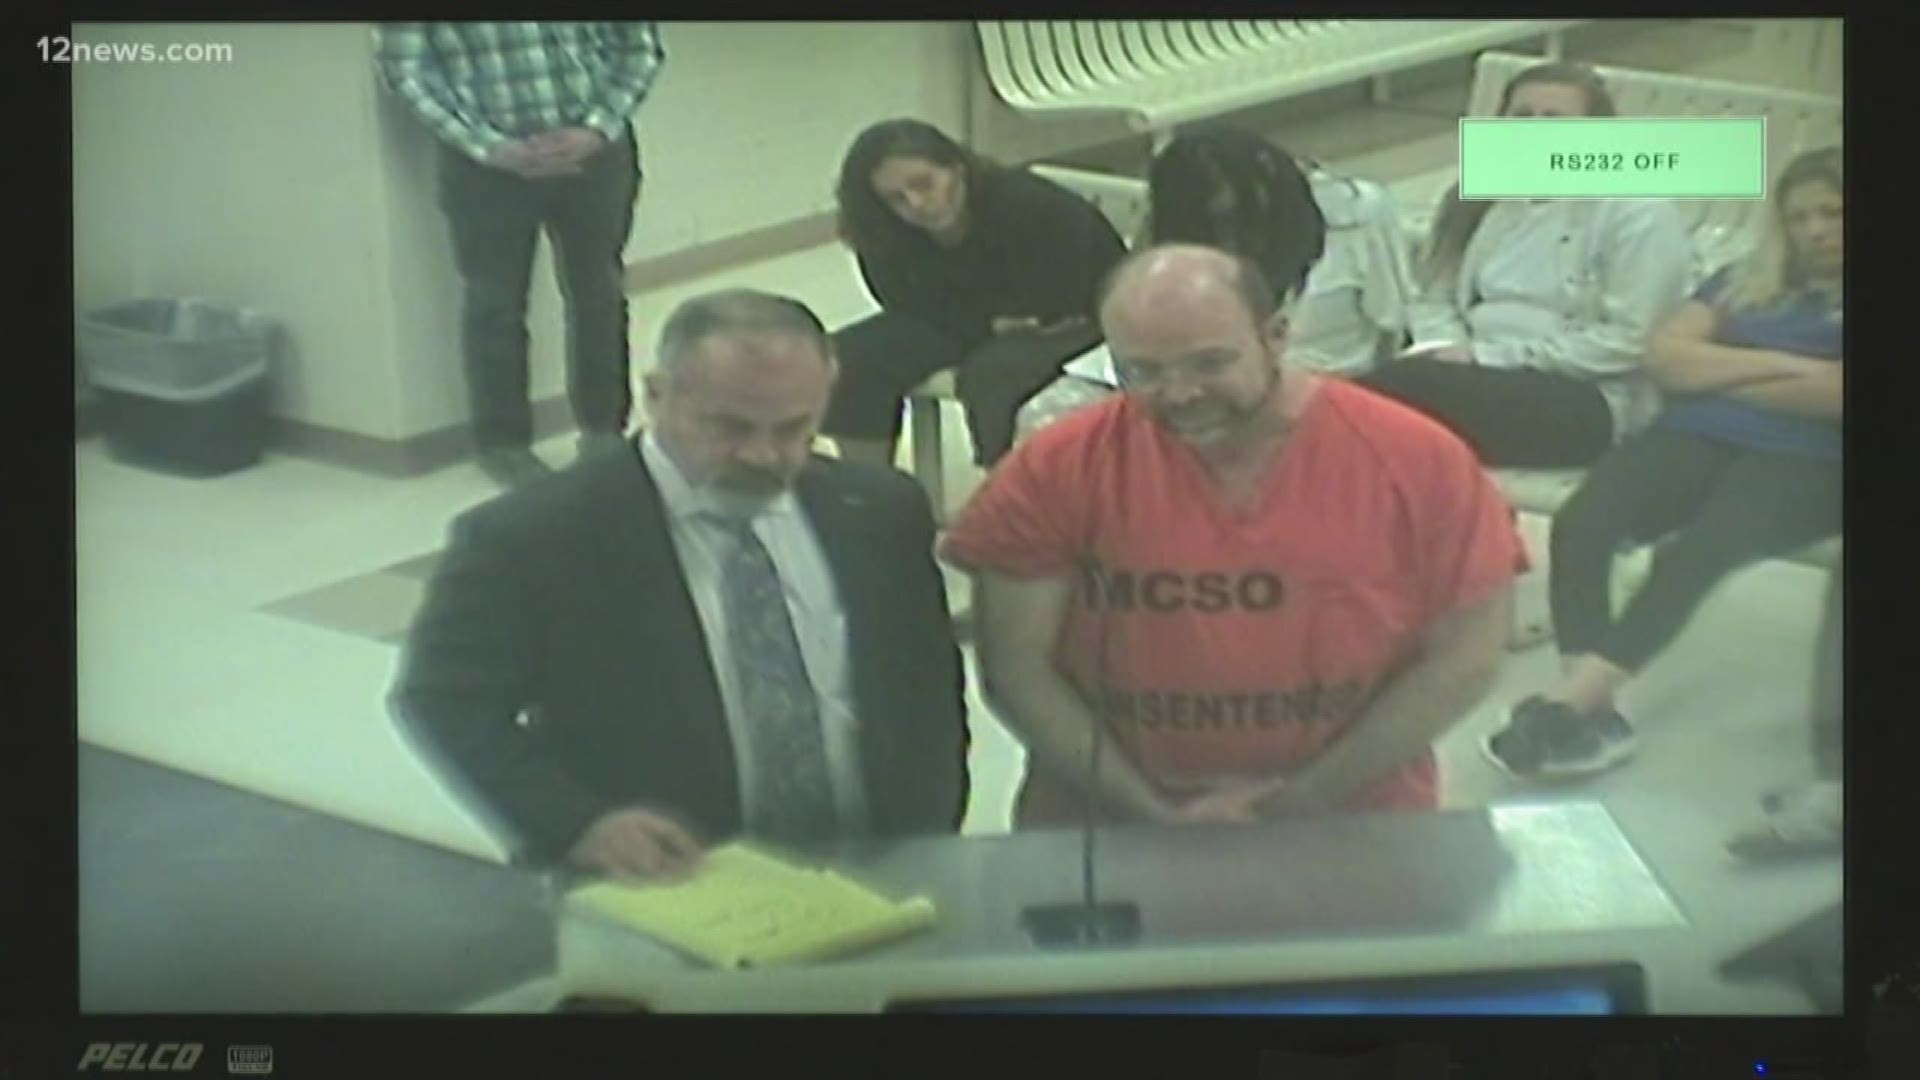 Ronald Yunis appeared in court for allegedly pointing a gun at a protester. Team 12's Colleen Sikora has the latest.